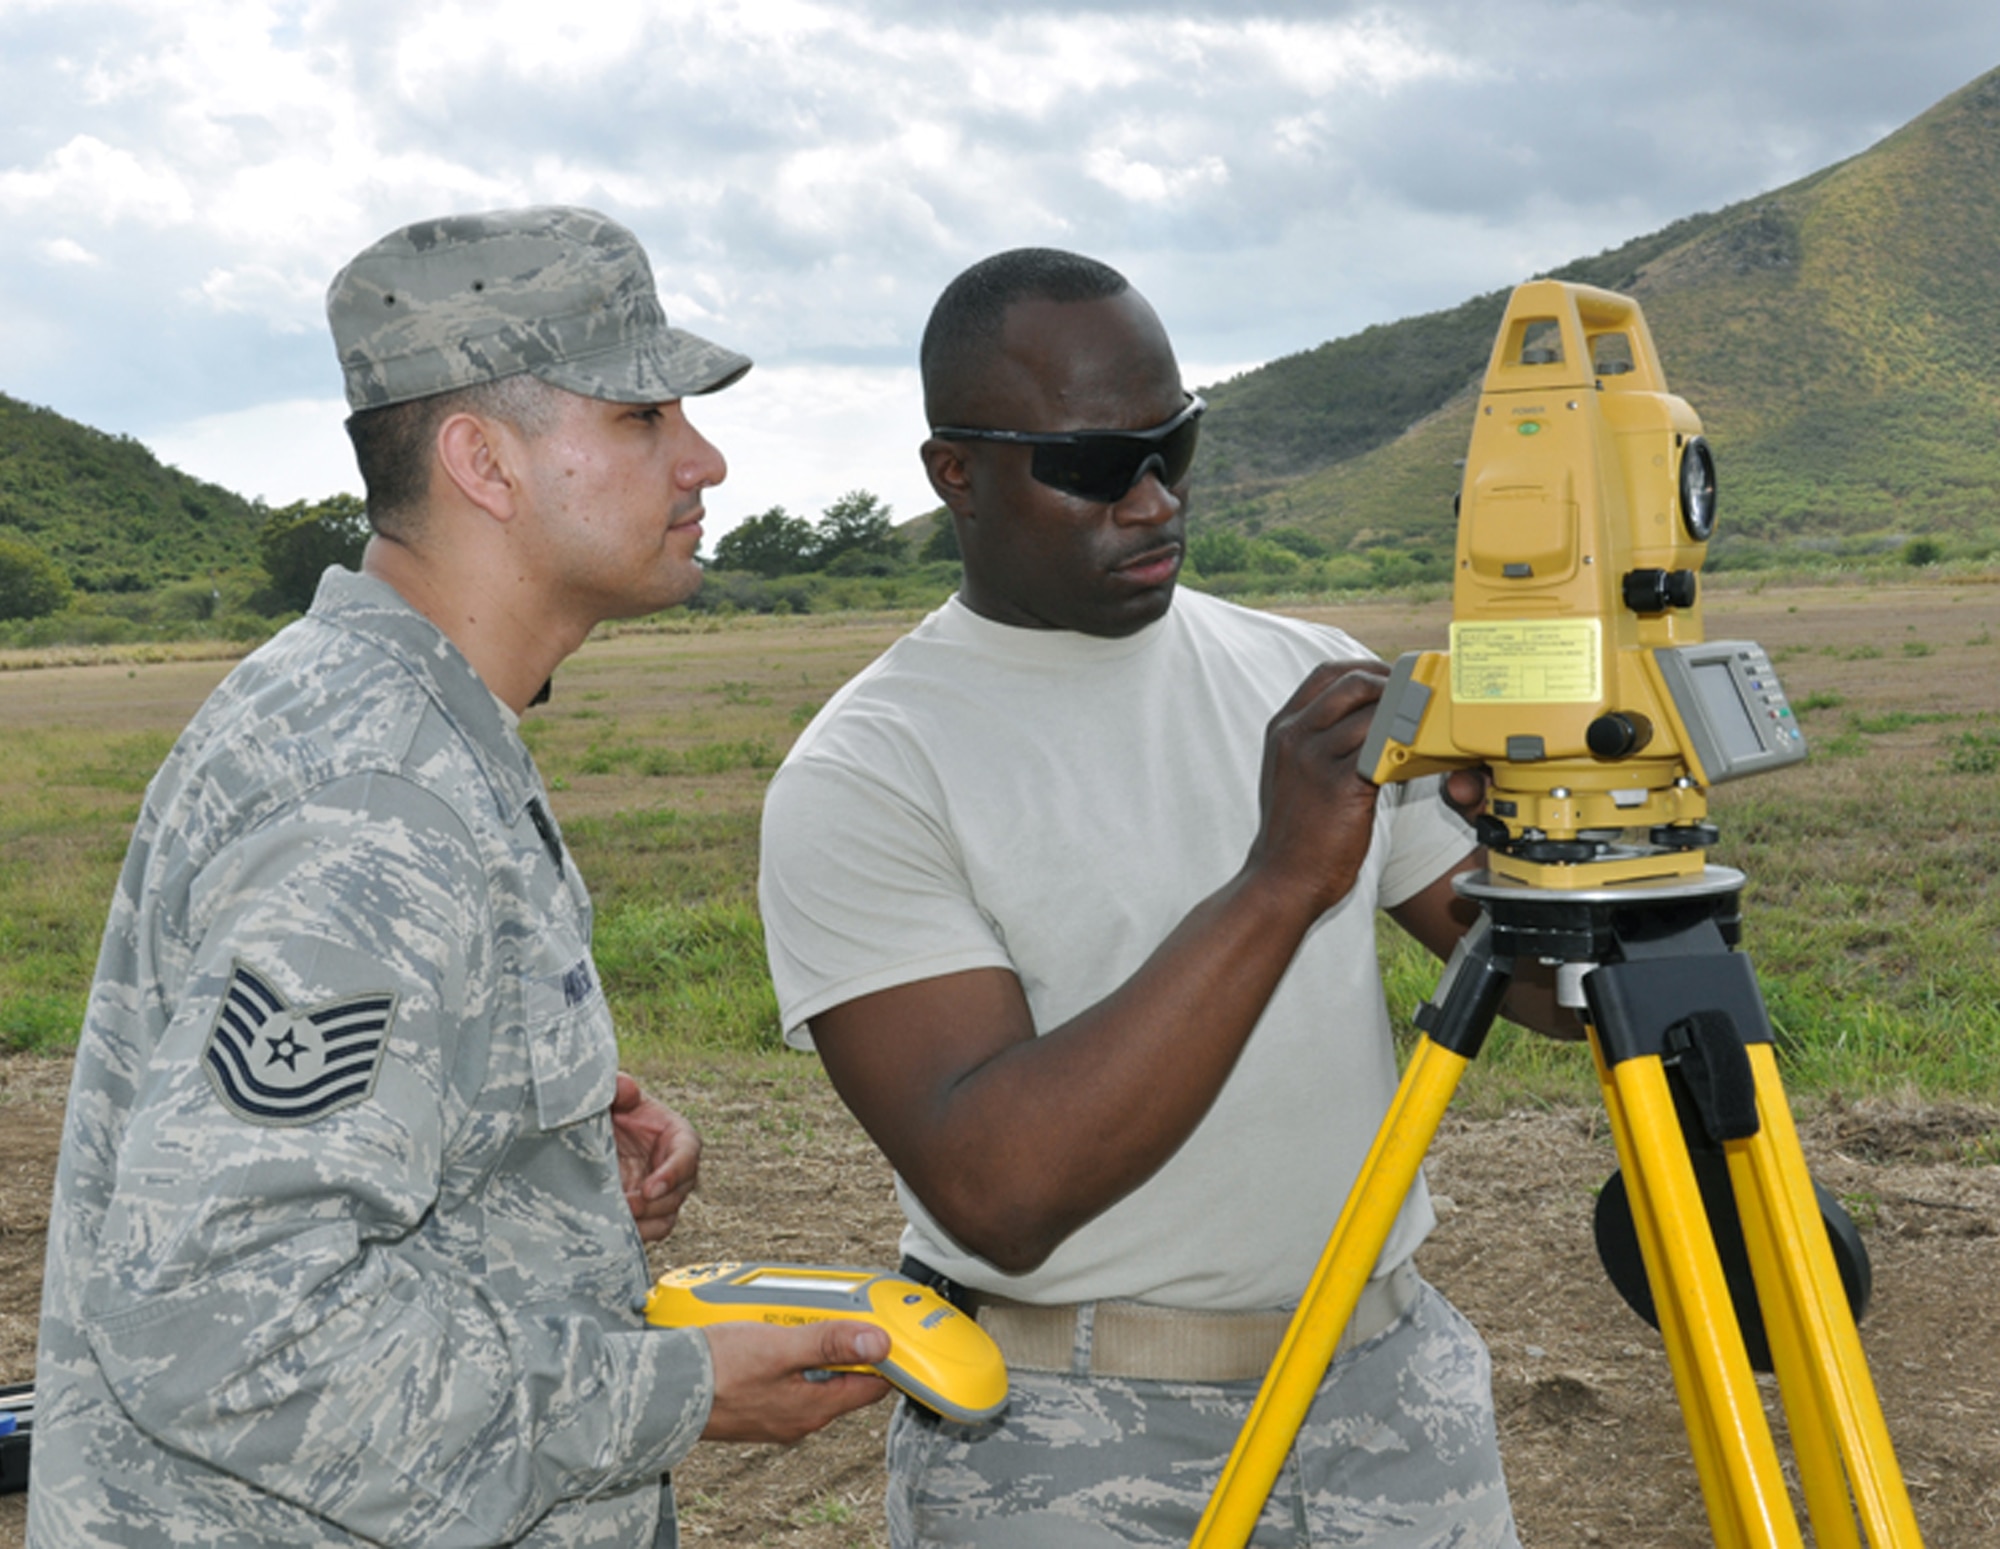 Tech. Sgt. Rob Hidalgo (left) and Master Sgt. Lamar Heard, members of the 817th Contingency Response Group's "Alpha Mike" airfield assessment team, use a laser range finder to take the measurements of a proposed landing strip during the Vigilant Guard exercise held in Puerto Rico March 23 to 29.  The 817th CRG is part of the 621st Contingency Response Wing at McGuire Air Force Base, N.J.  (U.S. Air Force photo/1st Lt. Dustin Doyle)